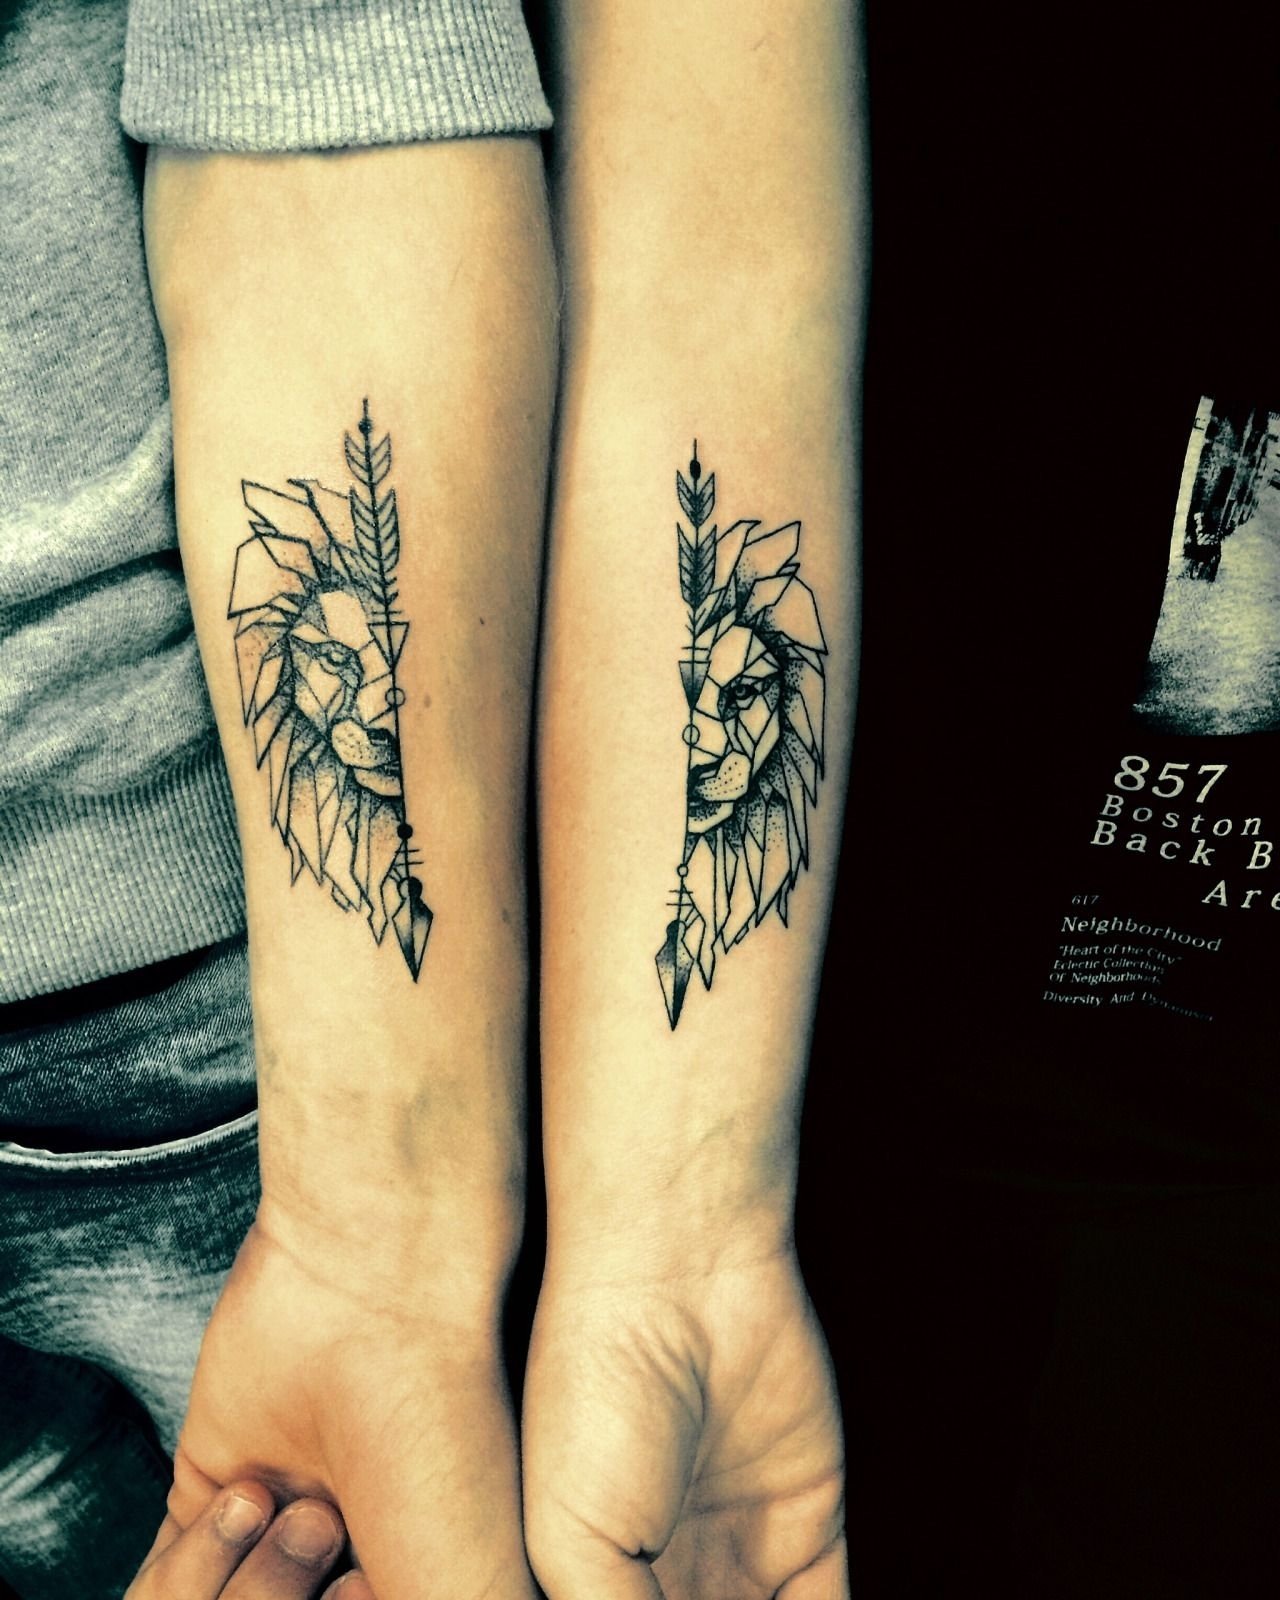 10 Stylish His And Her Matching Tattoos Ideas matching tattoos day mandram tattoos piercings pinterest 1 2022